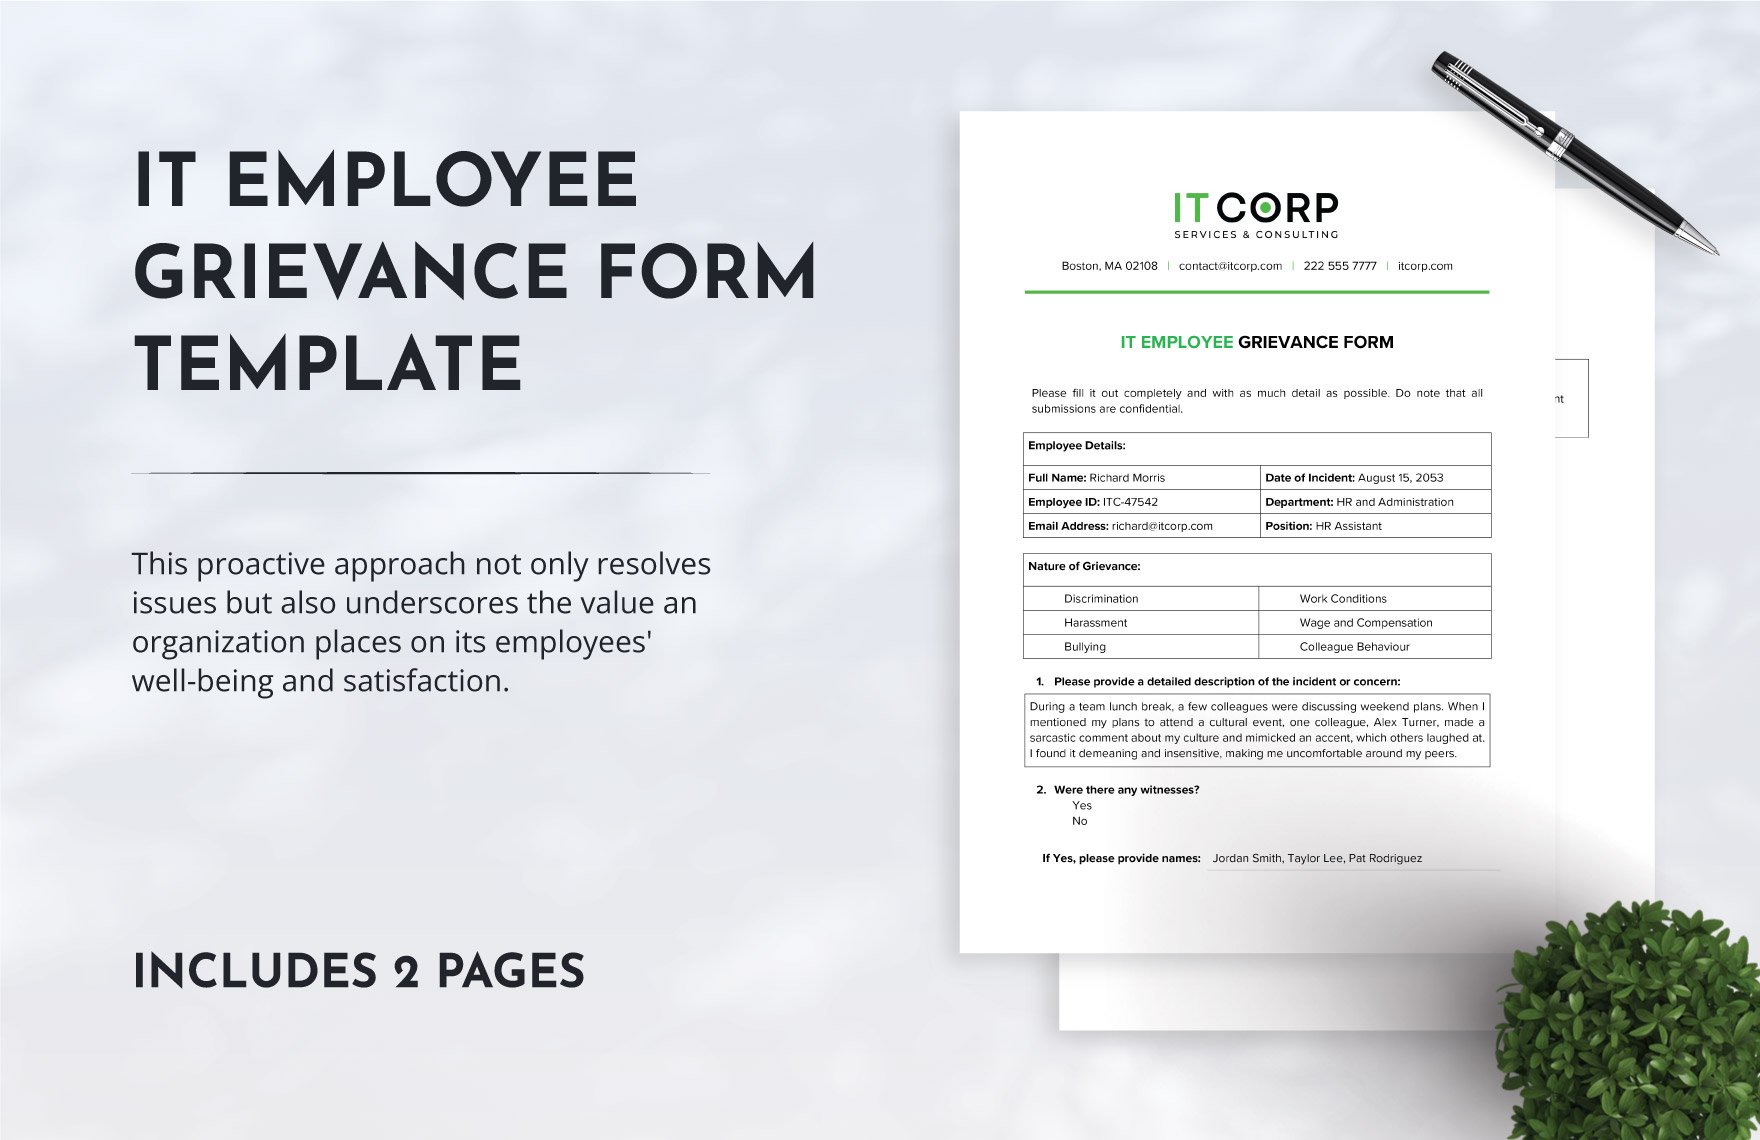 IT Employee Grievance Form Template in Word, Google Docs, PDF